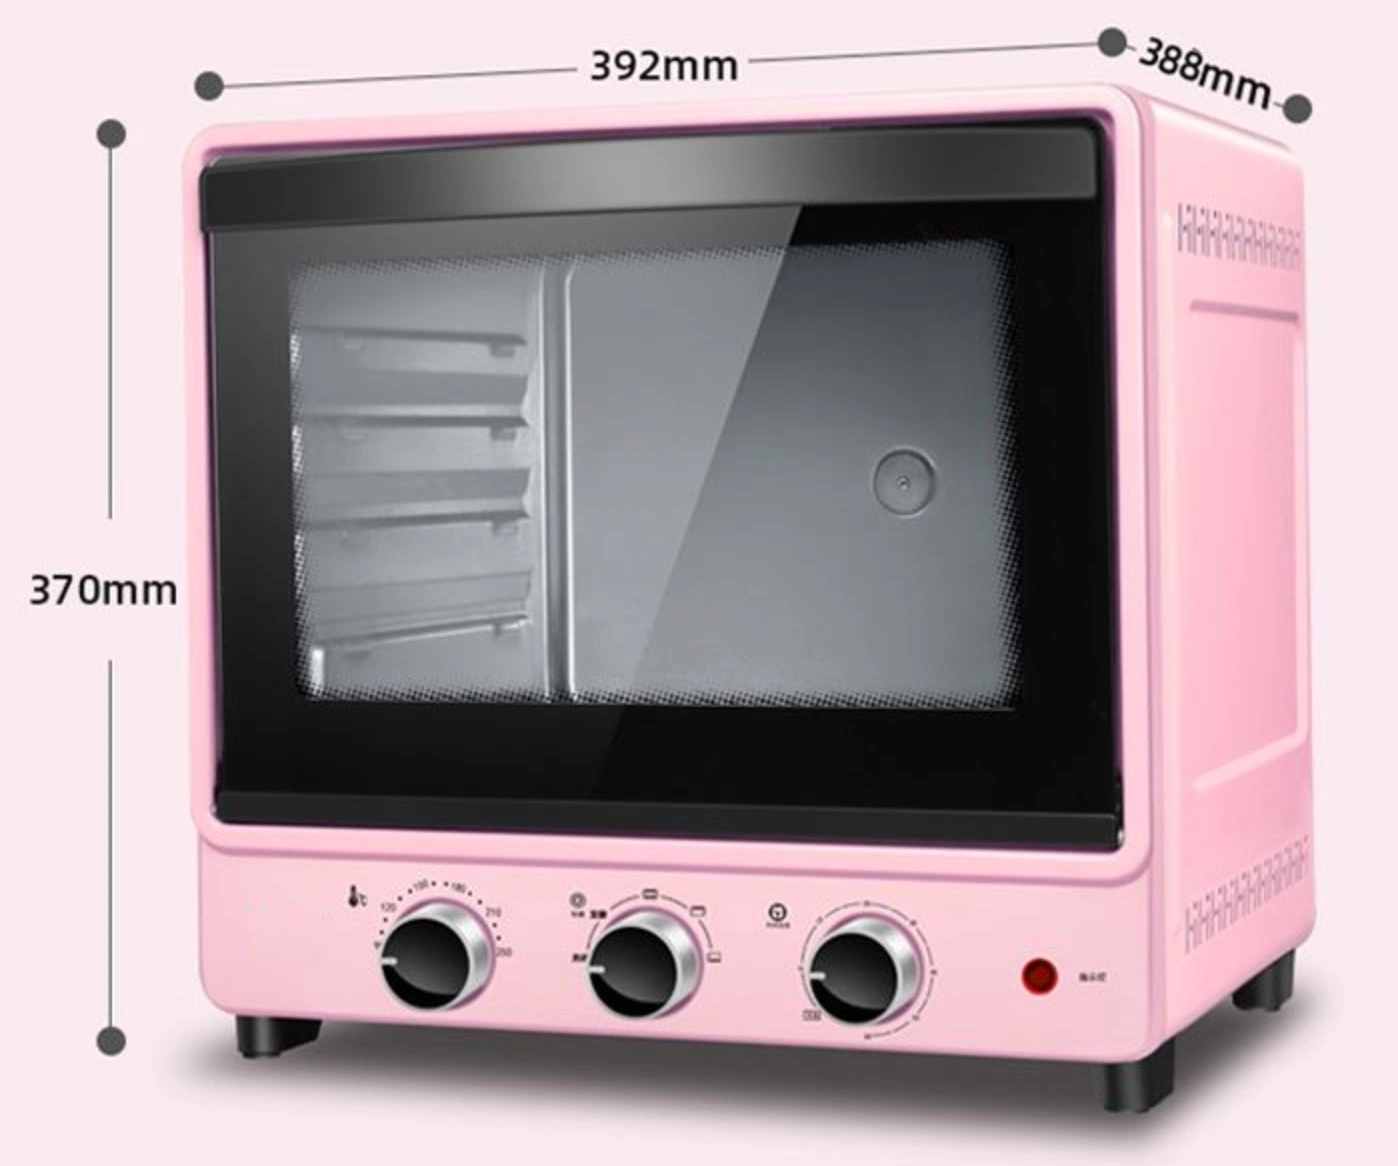 Versatile Electric Oven 1500W Adjustable Temperature Ideal for Baking Pizza and Microwave Cooking